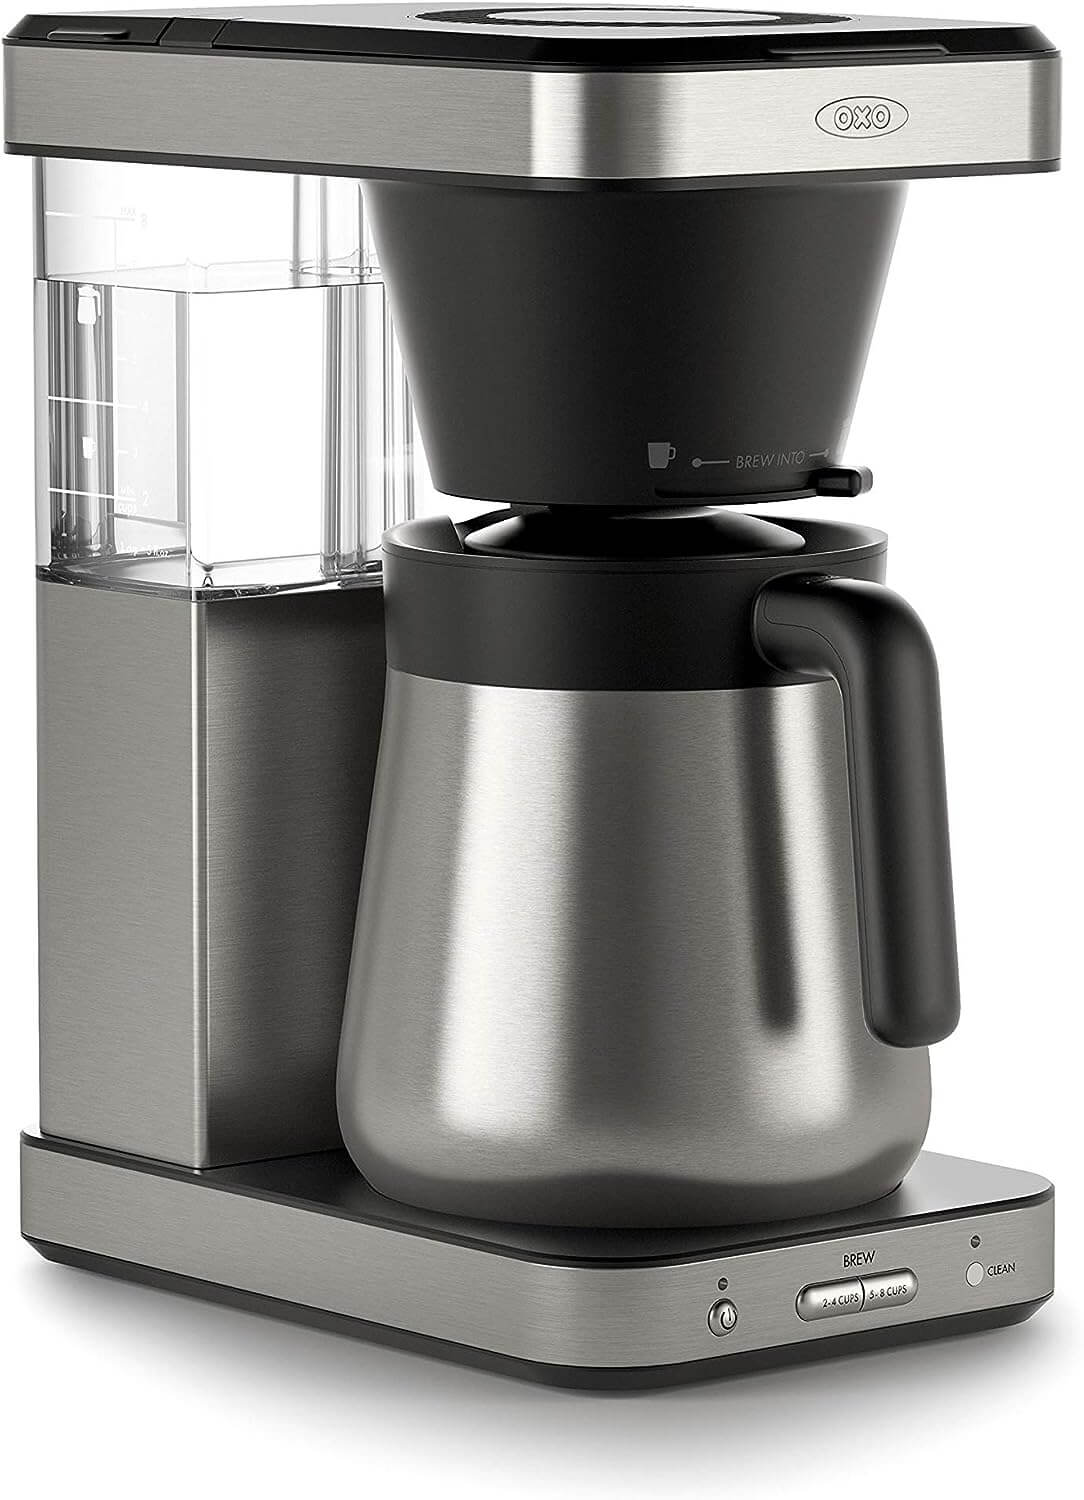 14 Best Coffee Makers of 2023 That Put the Pep in Your Morning